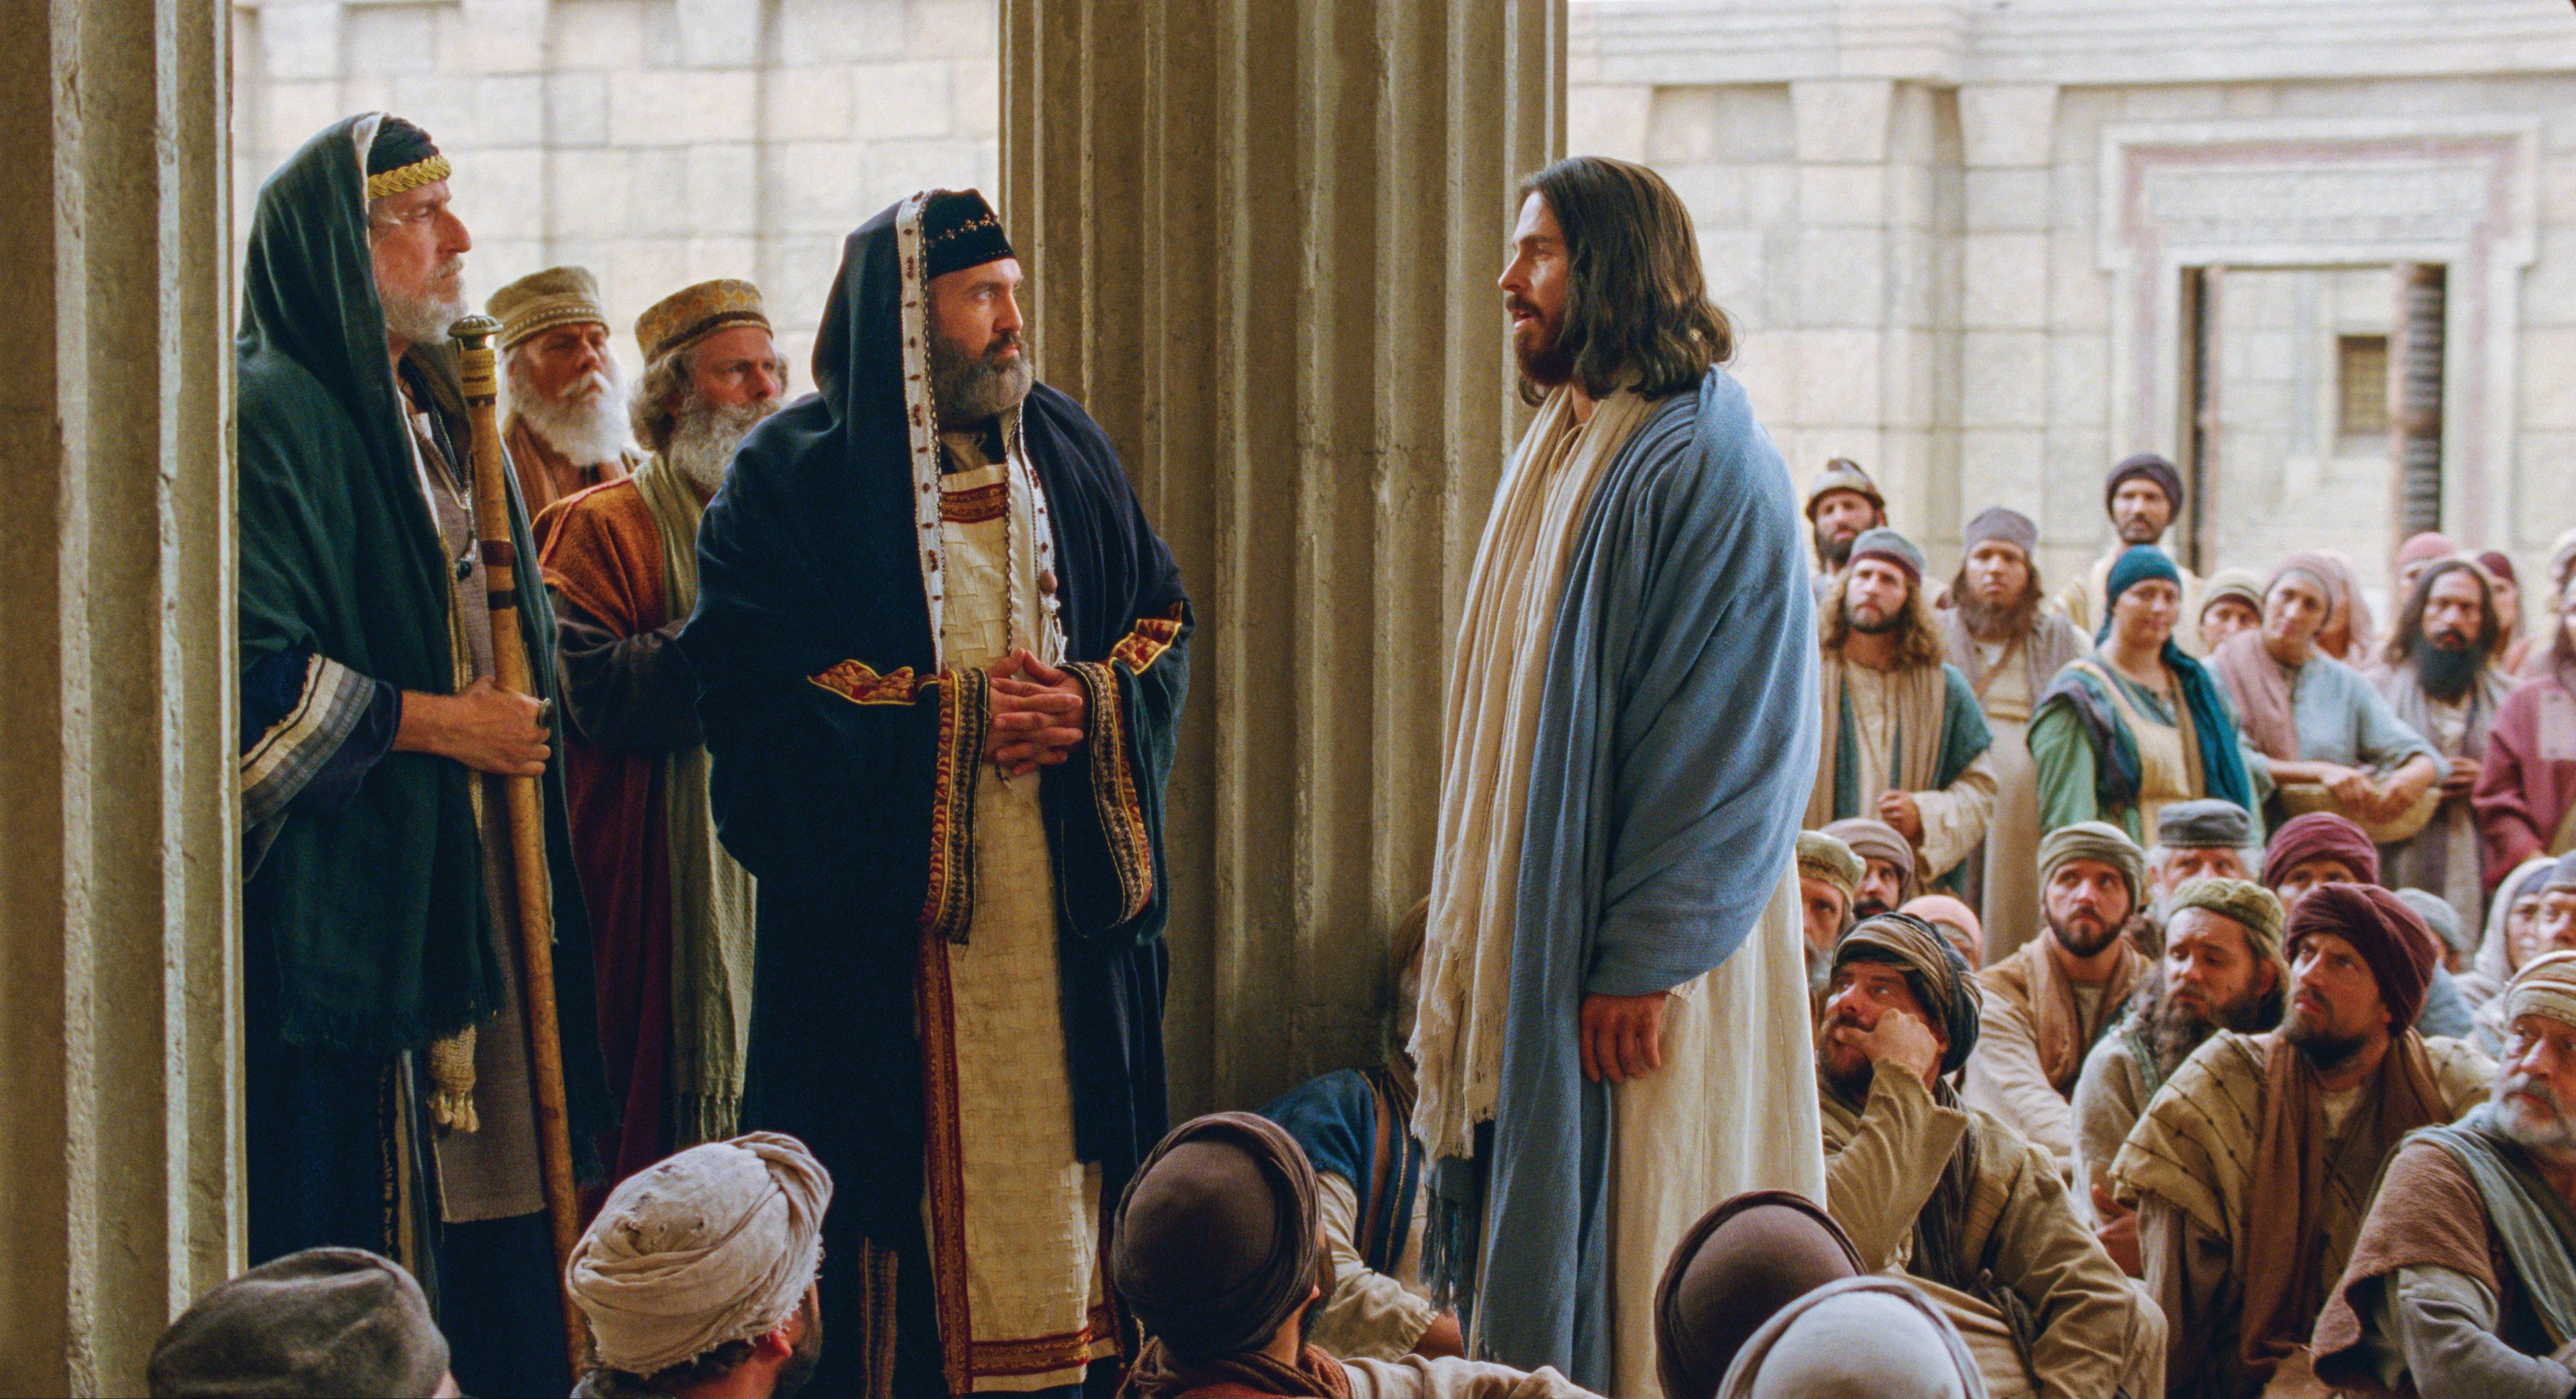 The chief priests question Christ's authority.